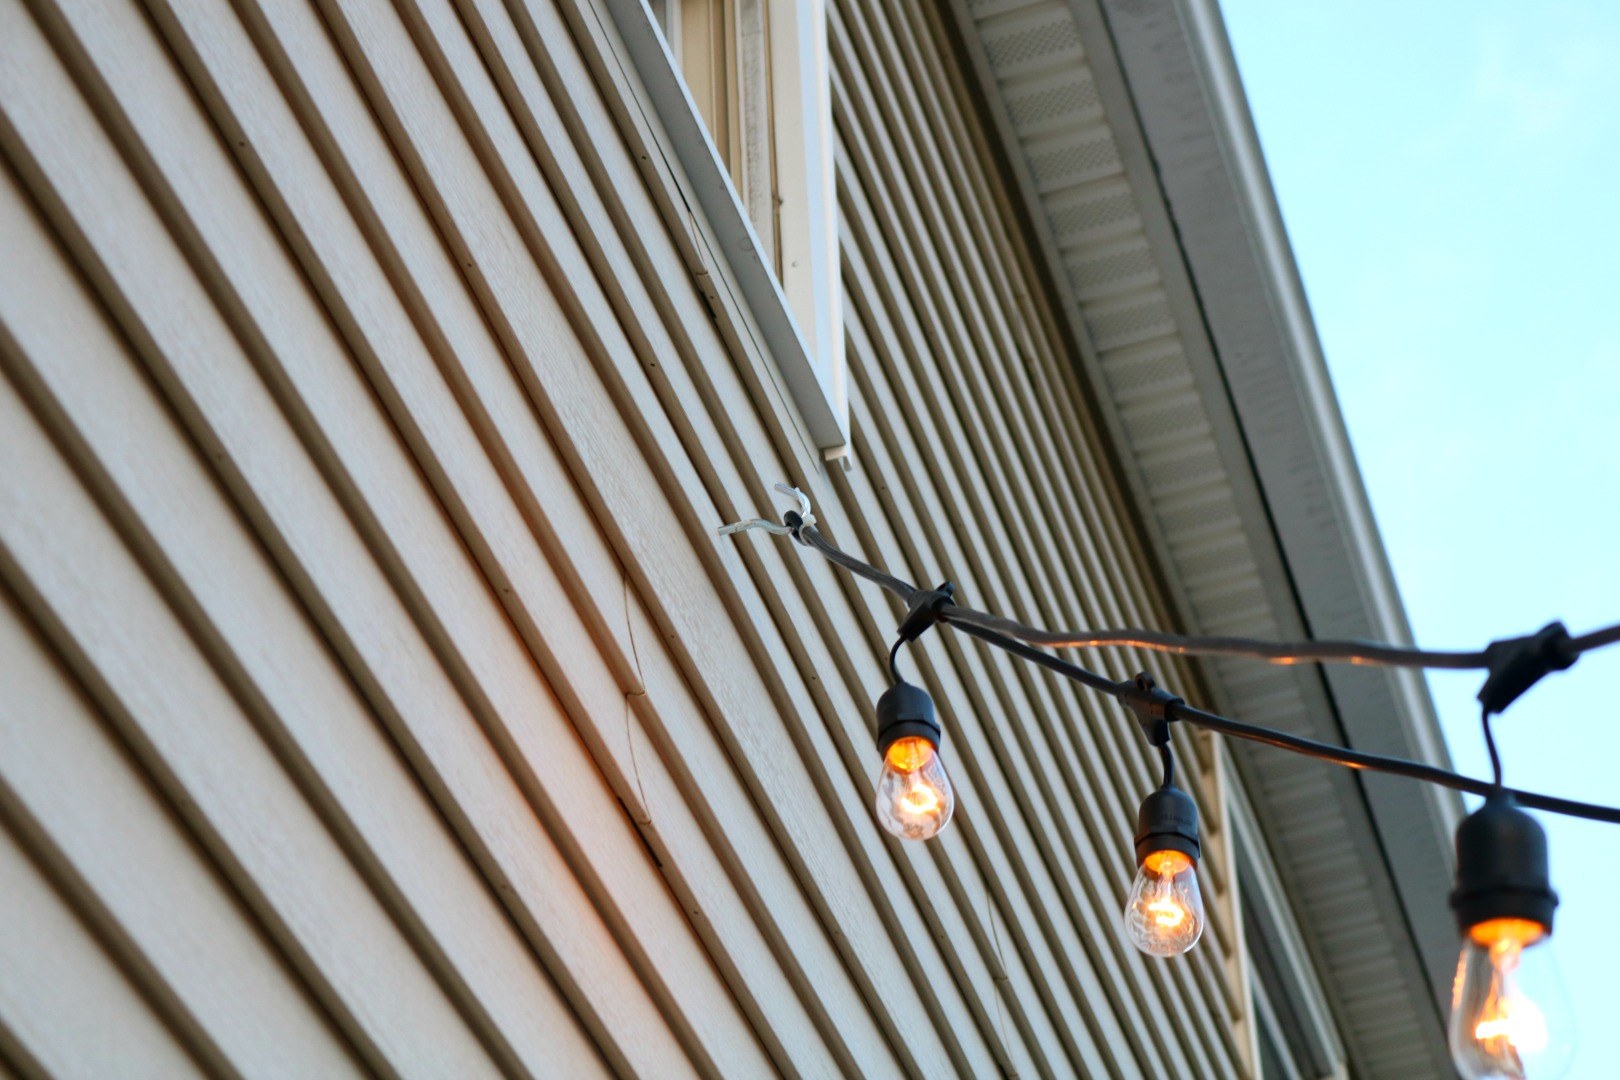 How We Hung Our Deck String Lights, How To Hang Patio Lights On Brick Wall